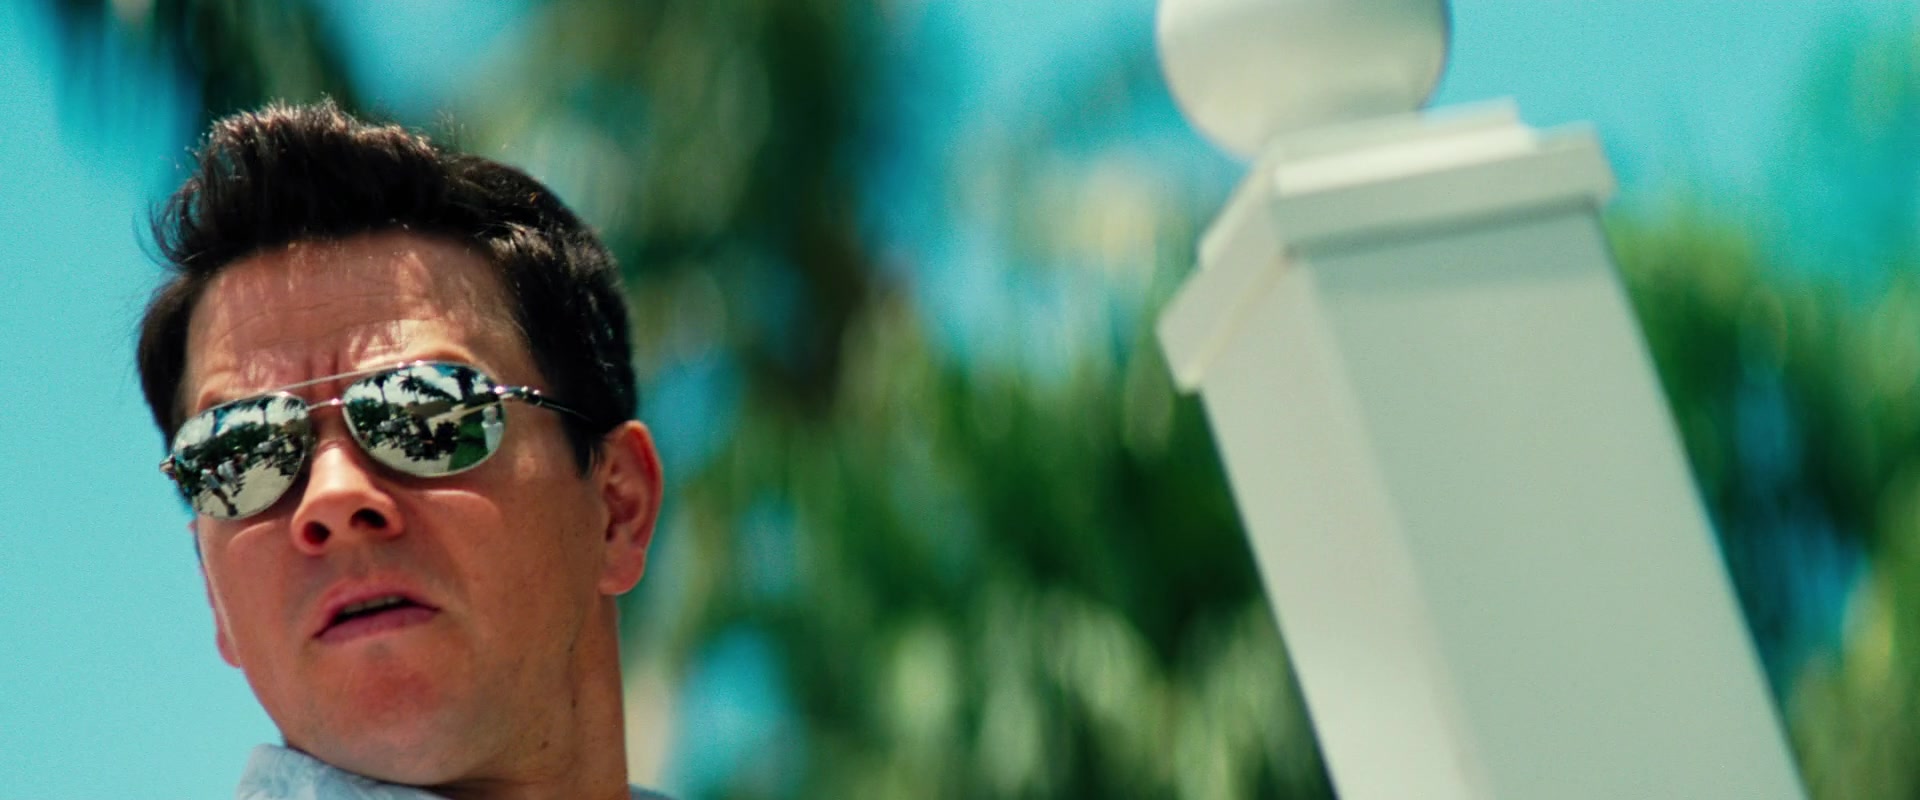 Ray Ban P Sunglasses Worn By Mark Wahlberg In Pain Gain 13